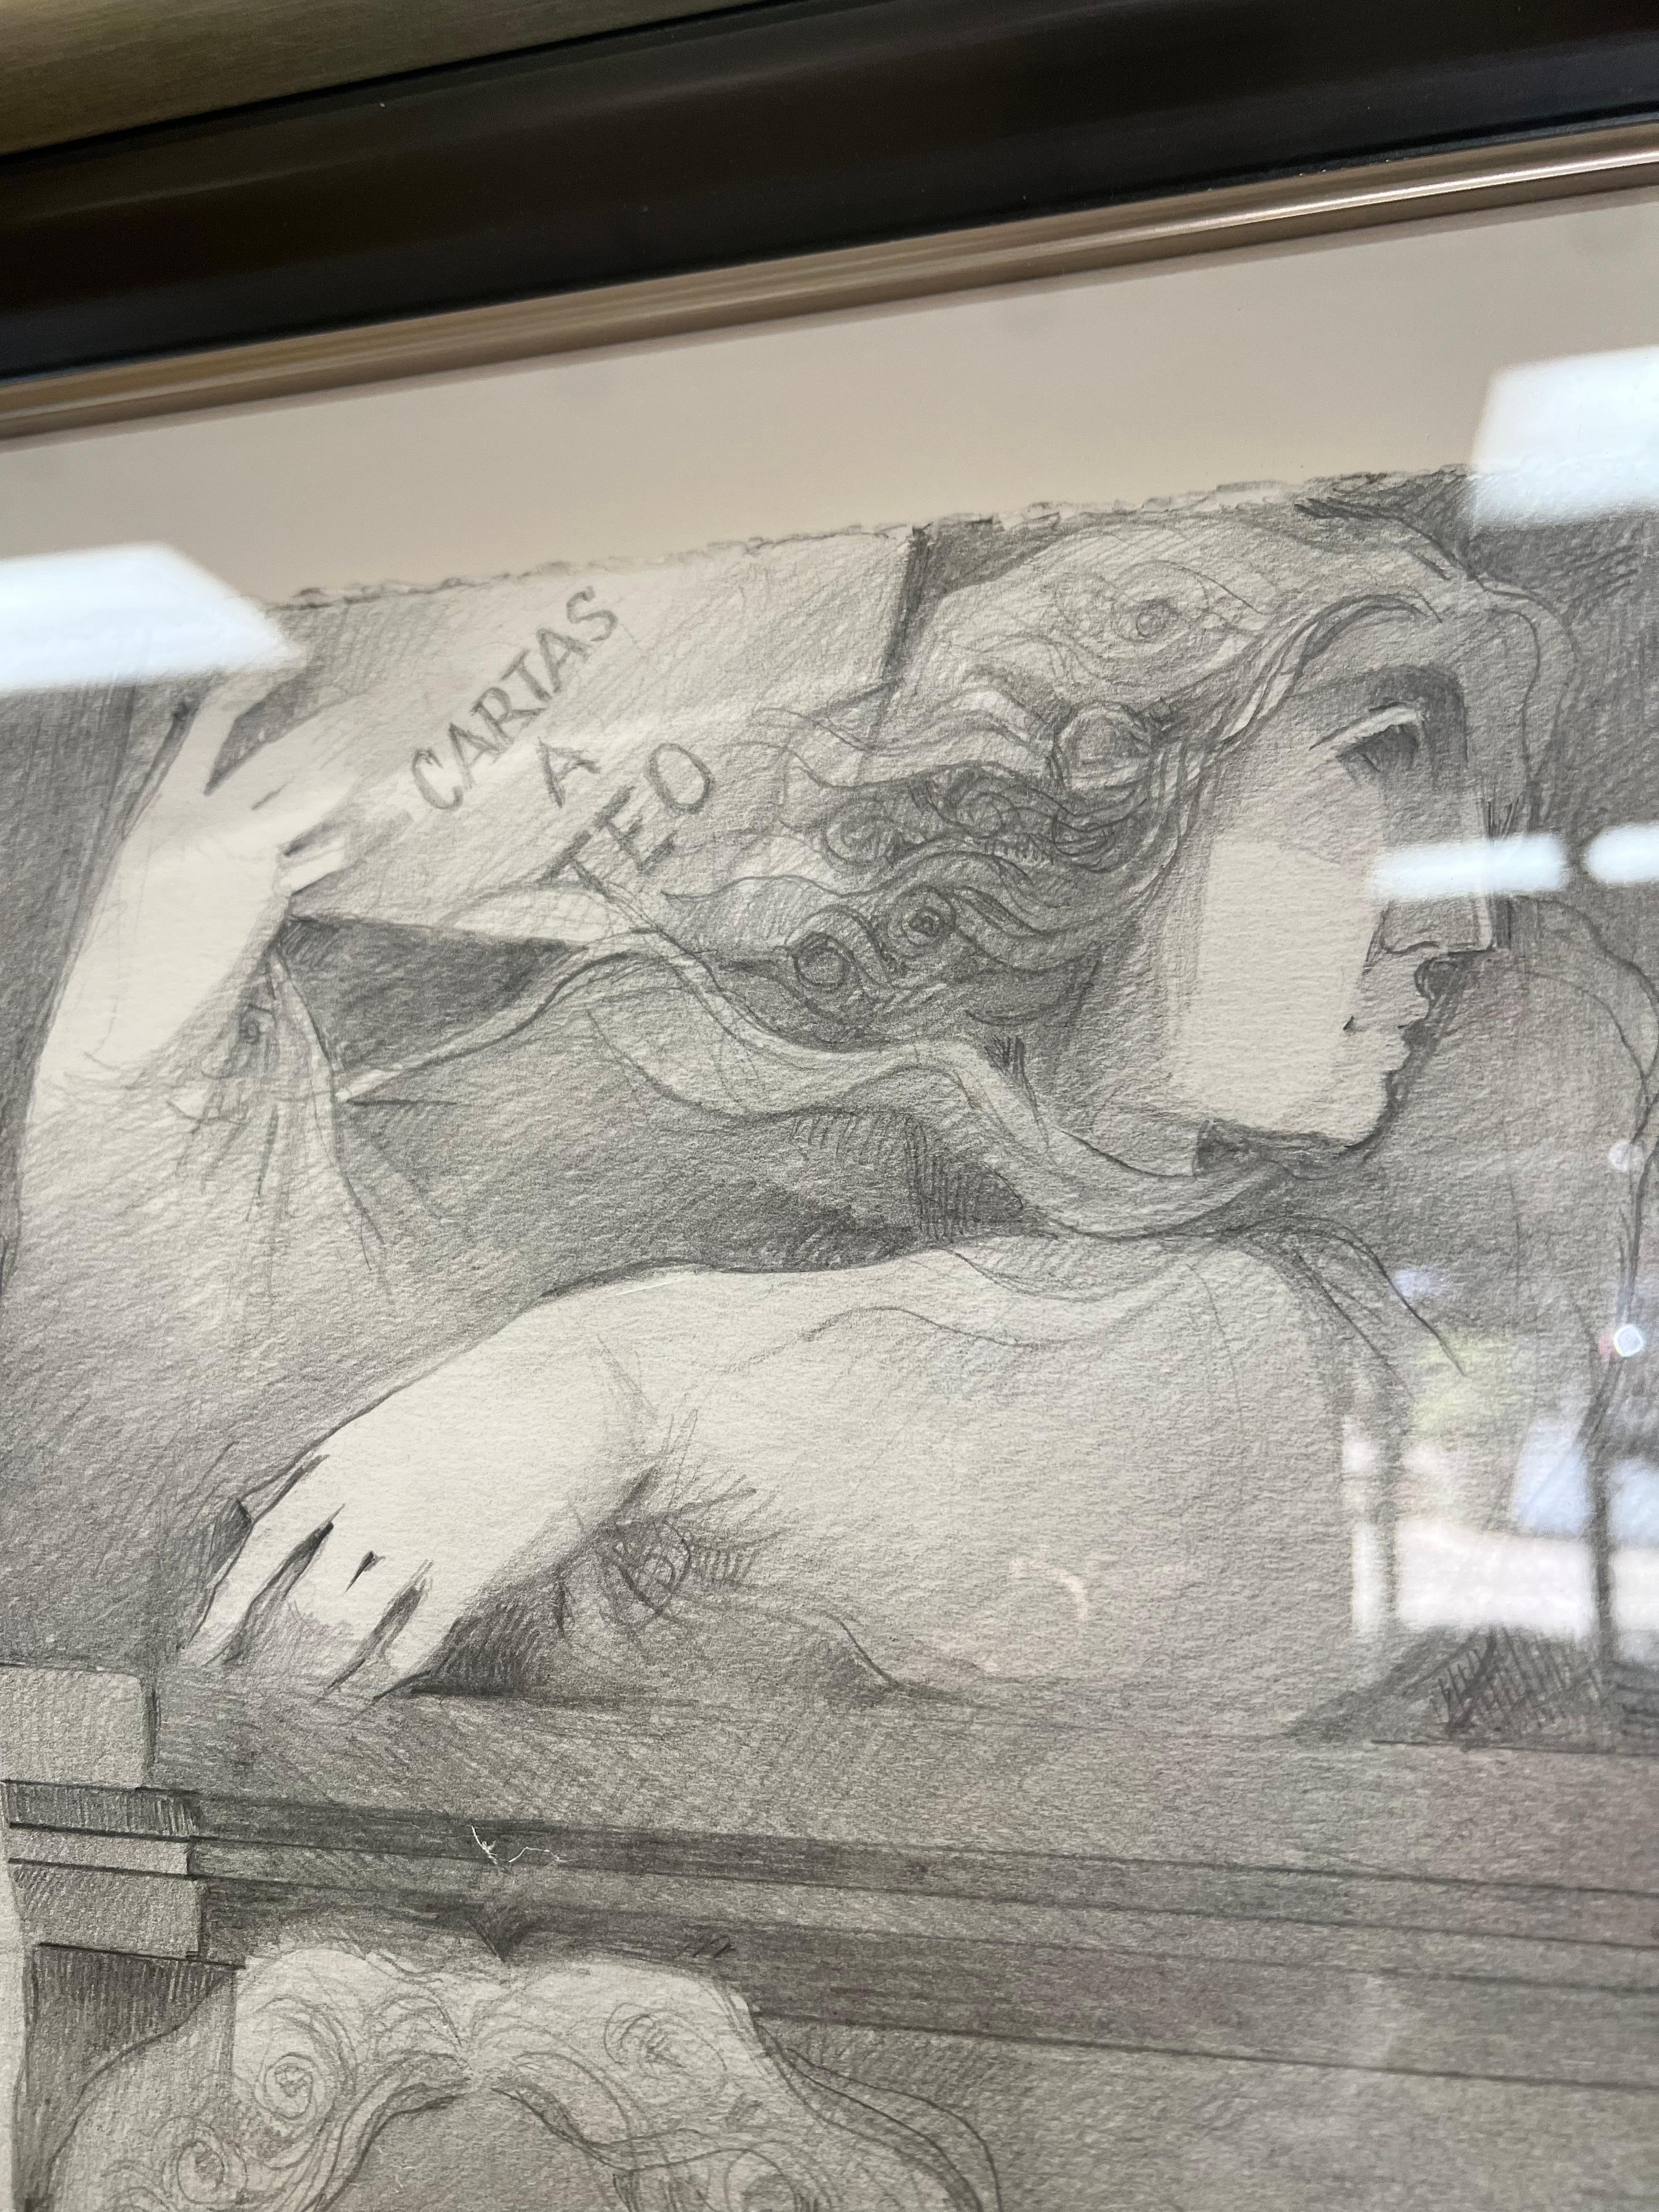 This graphite drawing on paper is in excellent condition and and has only been shown in a gallery setting. The size dimensions do not include the frame.  

Alvar pays homage to one of his favorite artists- the iconic Post-Impressionist painter